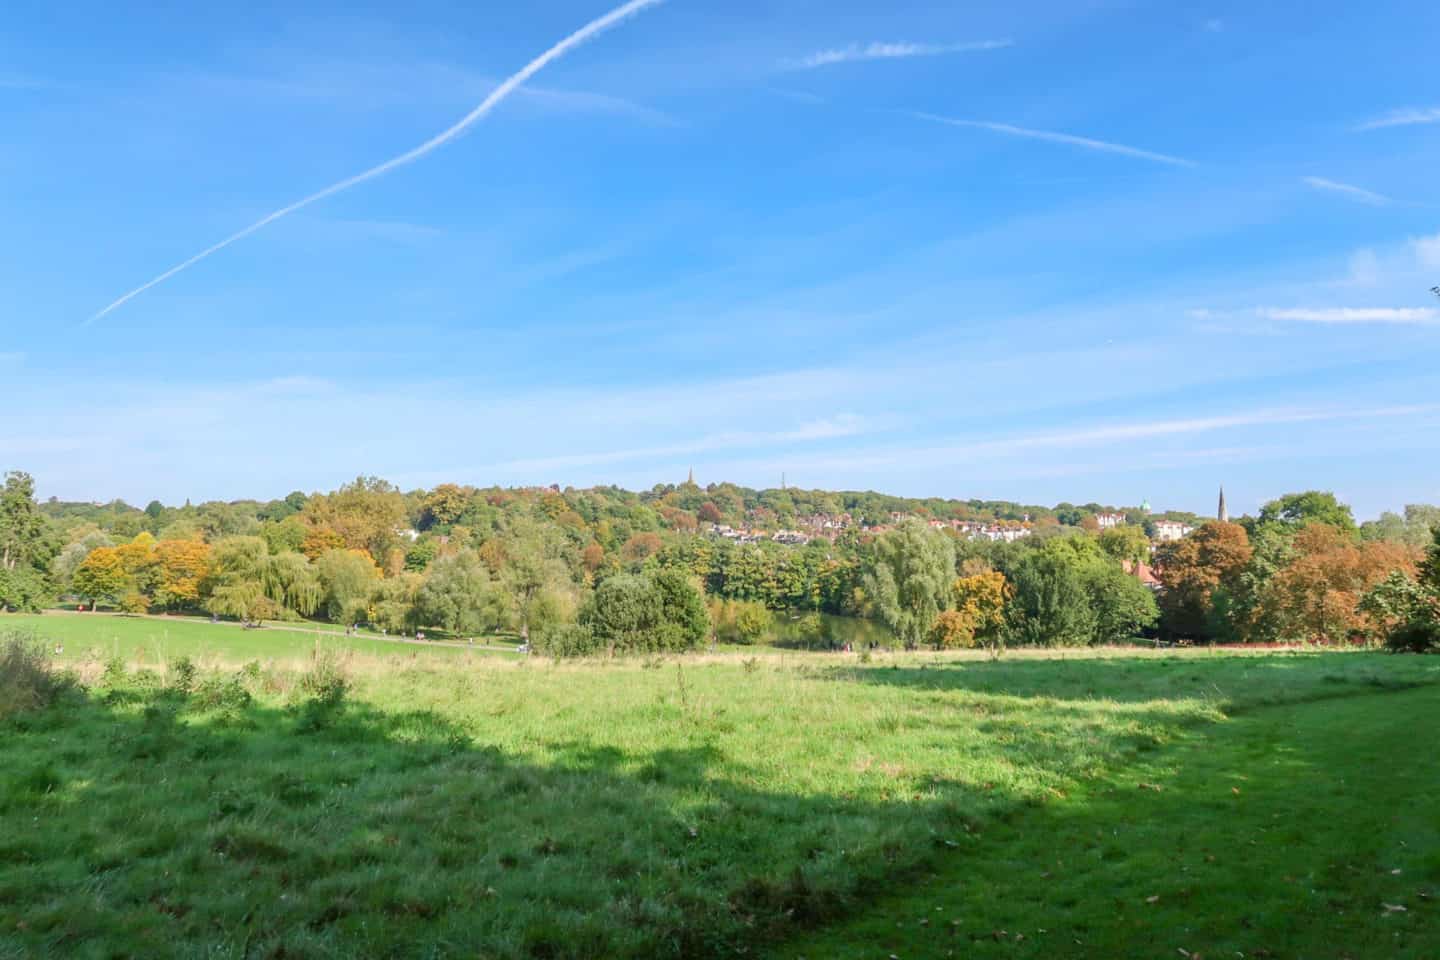 Green fields and trees in Hampstead Heath Park | what to do on Hampstead Heath